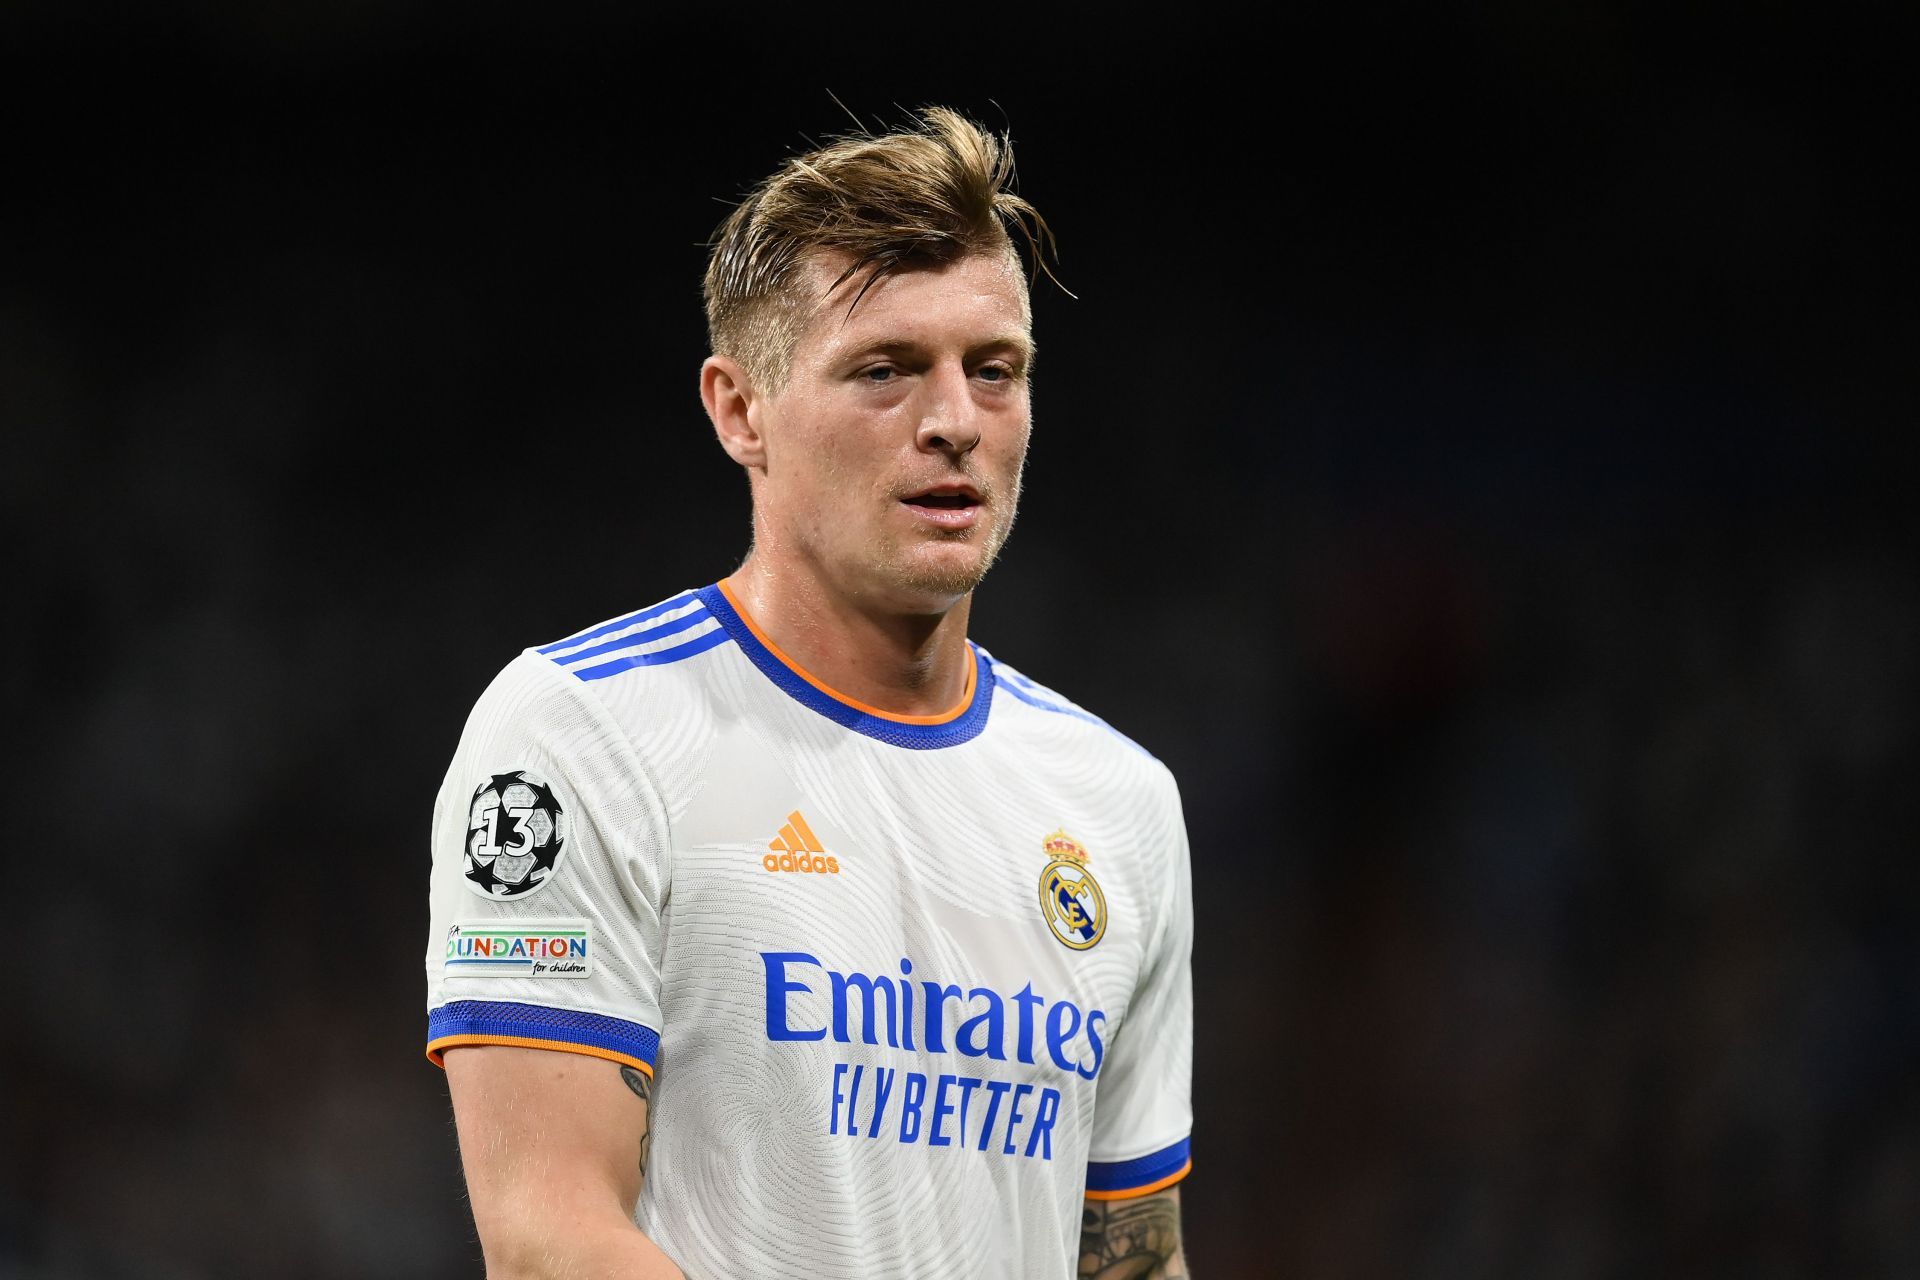 Toni Kroos is preparing to face Liverpool next.